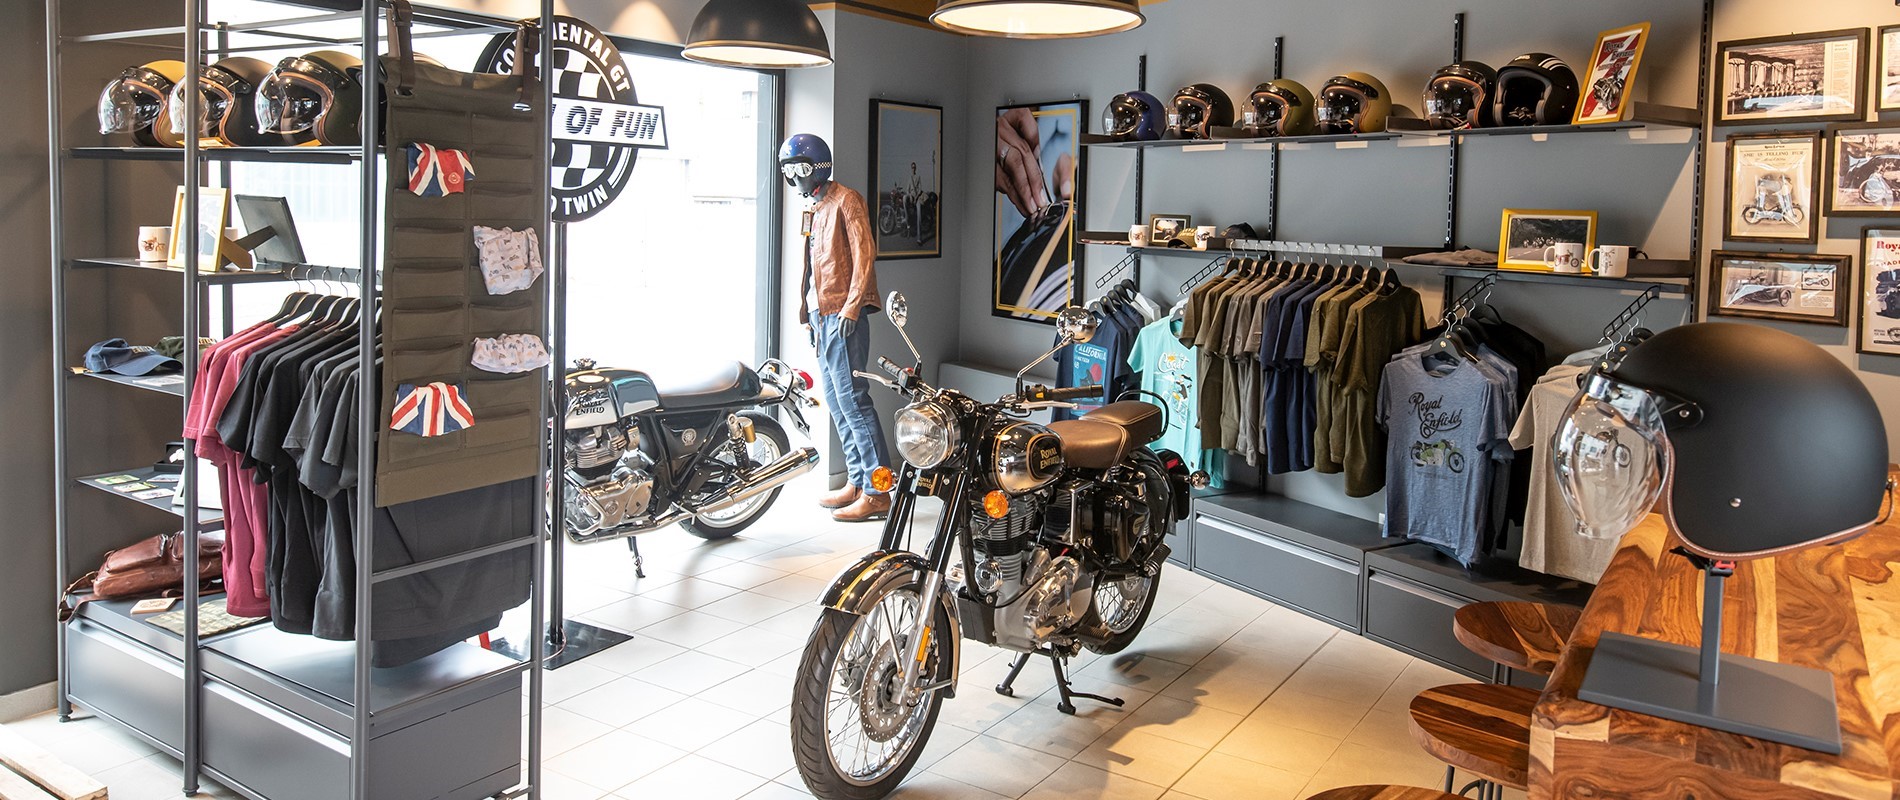 A Royal Enfield showroom, with two bikes on display along with riding gear and other branded merchandise